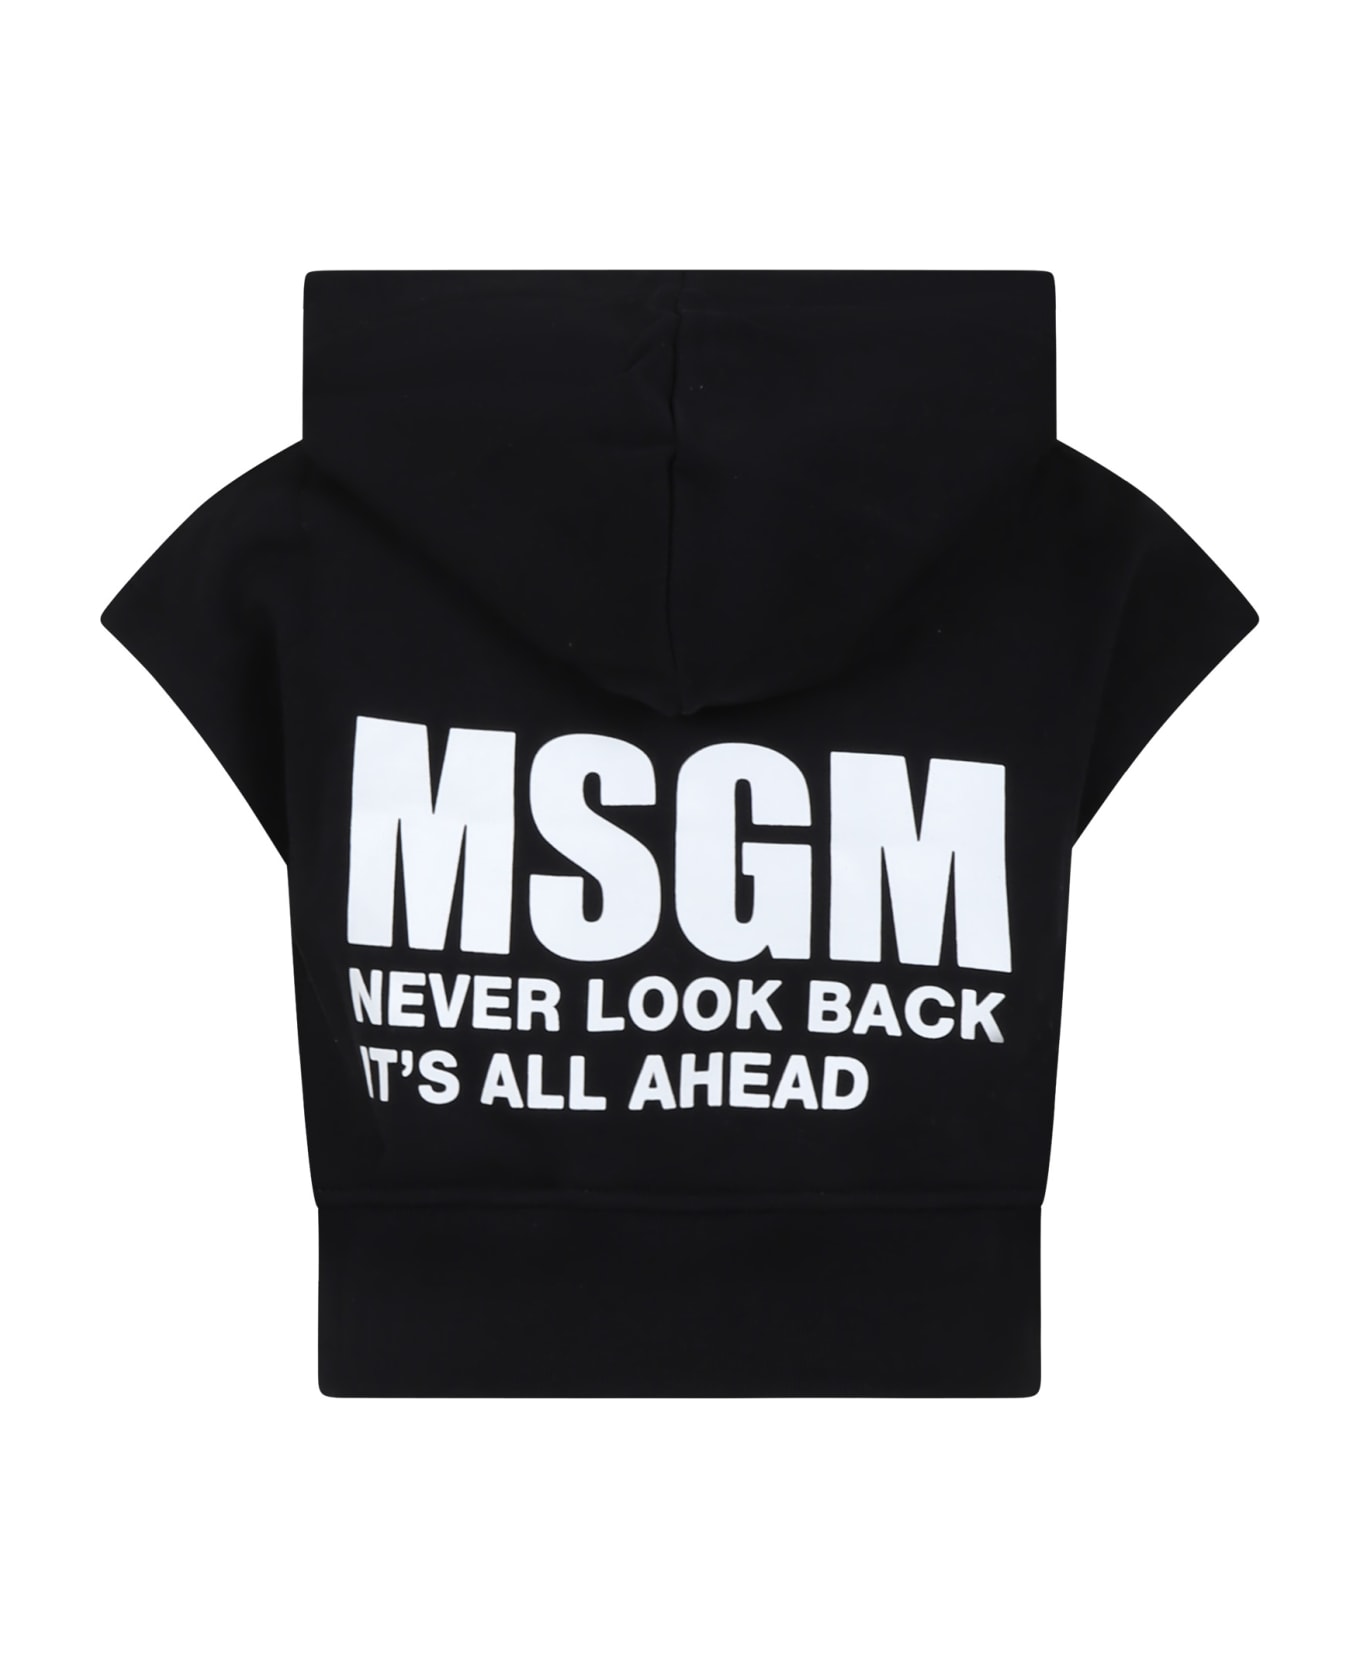 MSGM Black Sweatshirt For Girl With Logo And Writing - Black